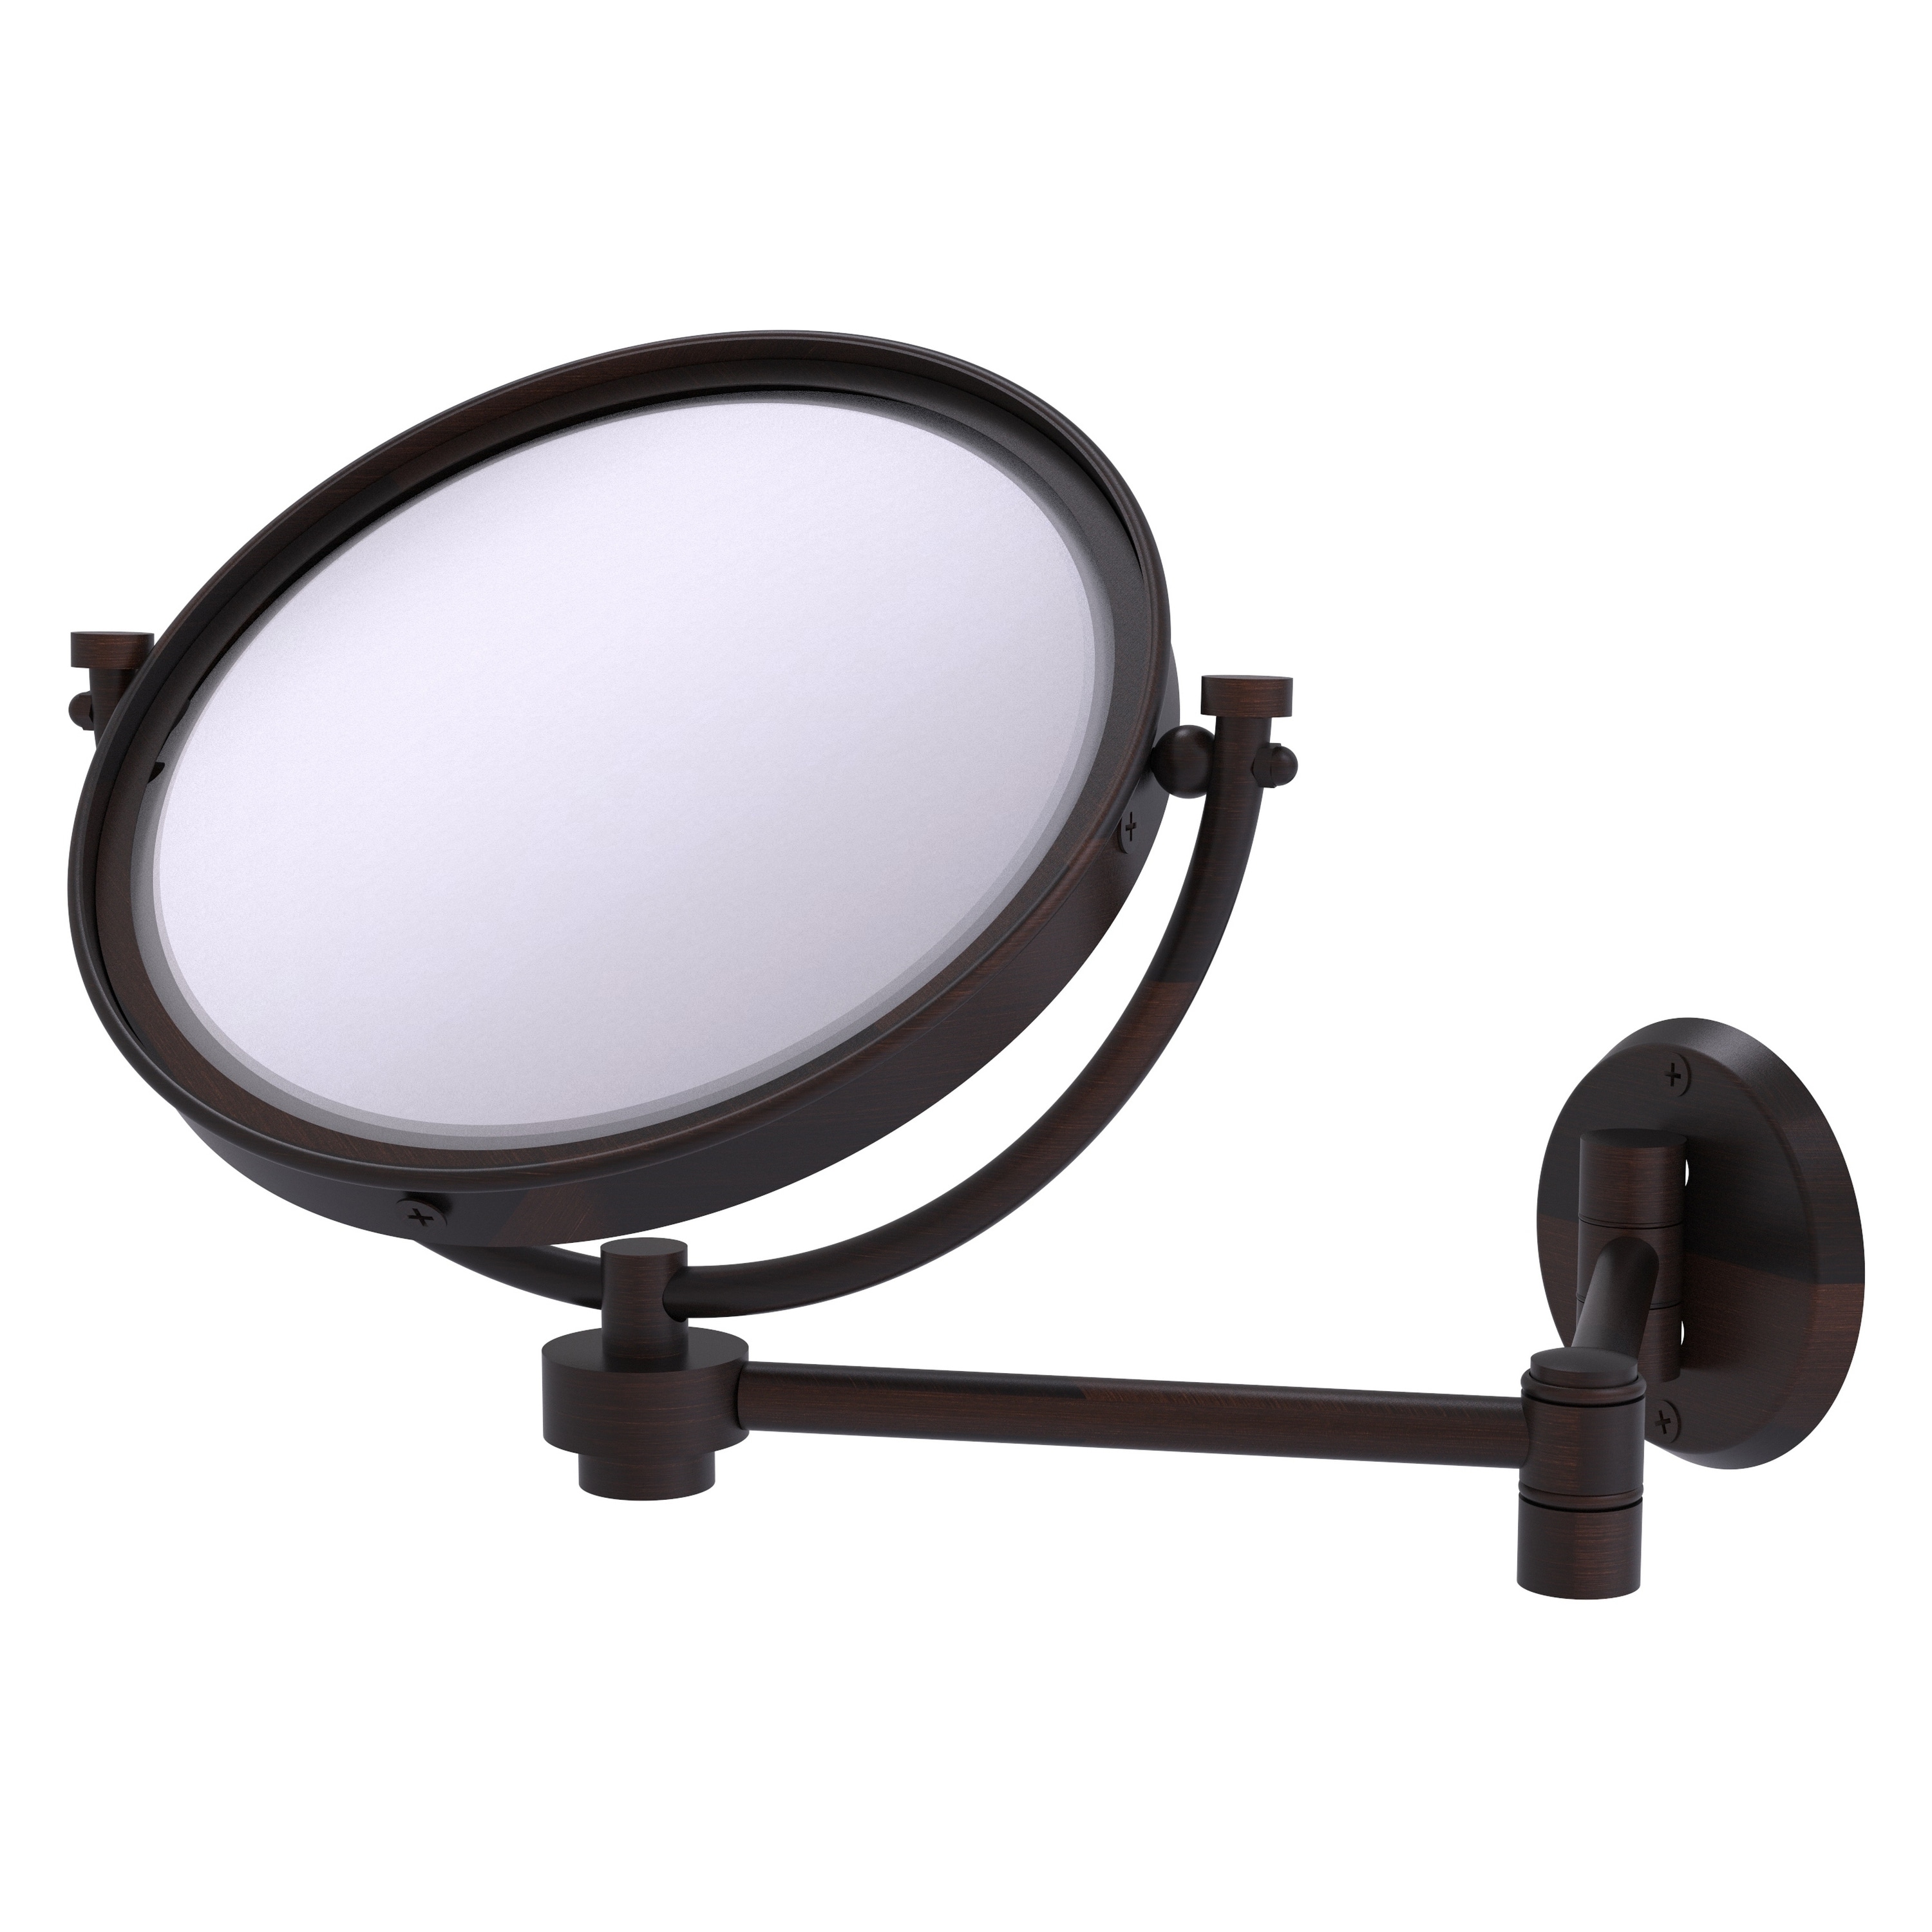 8-in x 10-in Distressed White Double-sided 2X Magnifying Wall-mounted Vanity Mirror | - Allied Brass WM-6/2X-VB